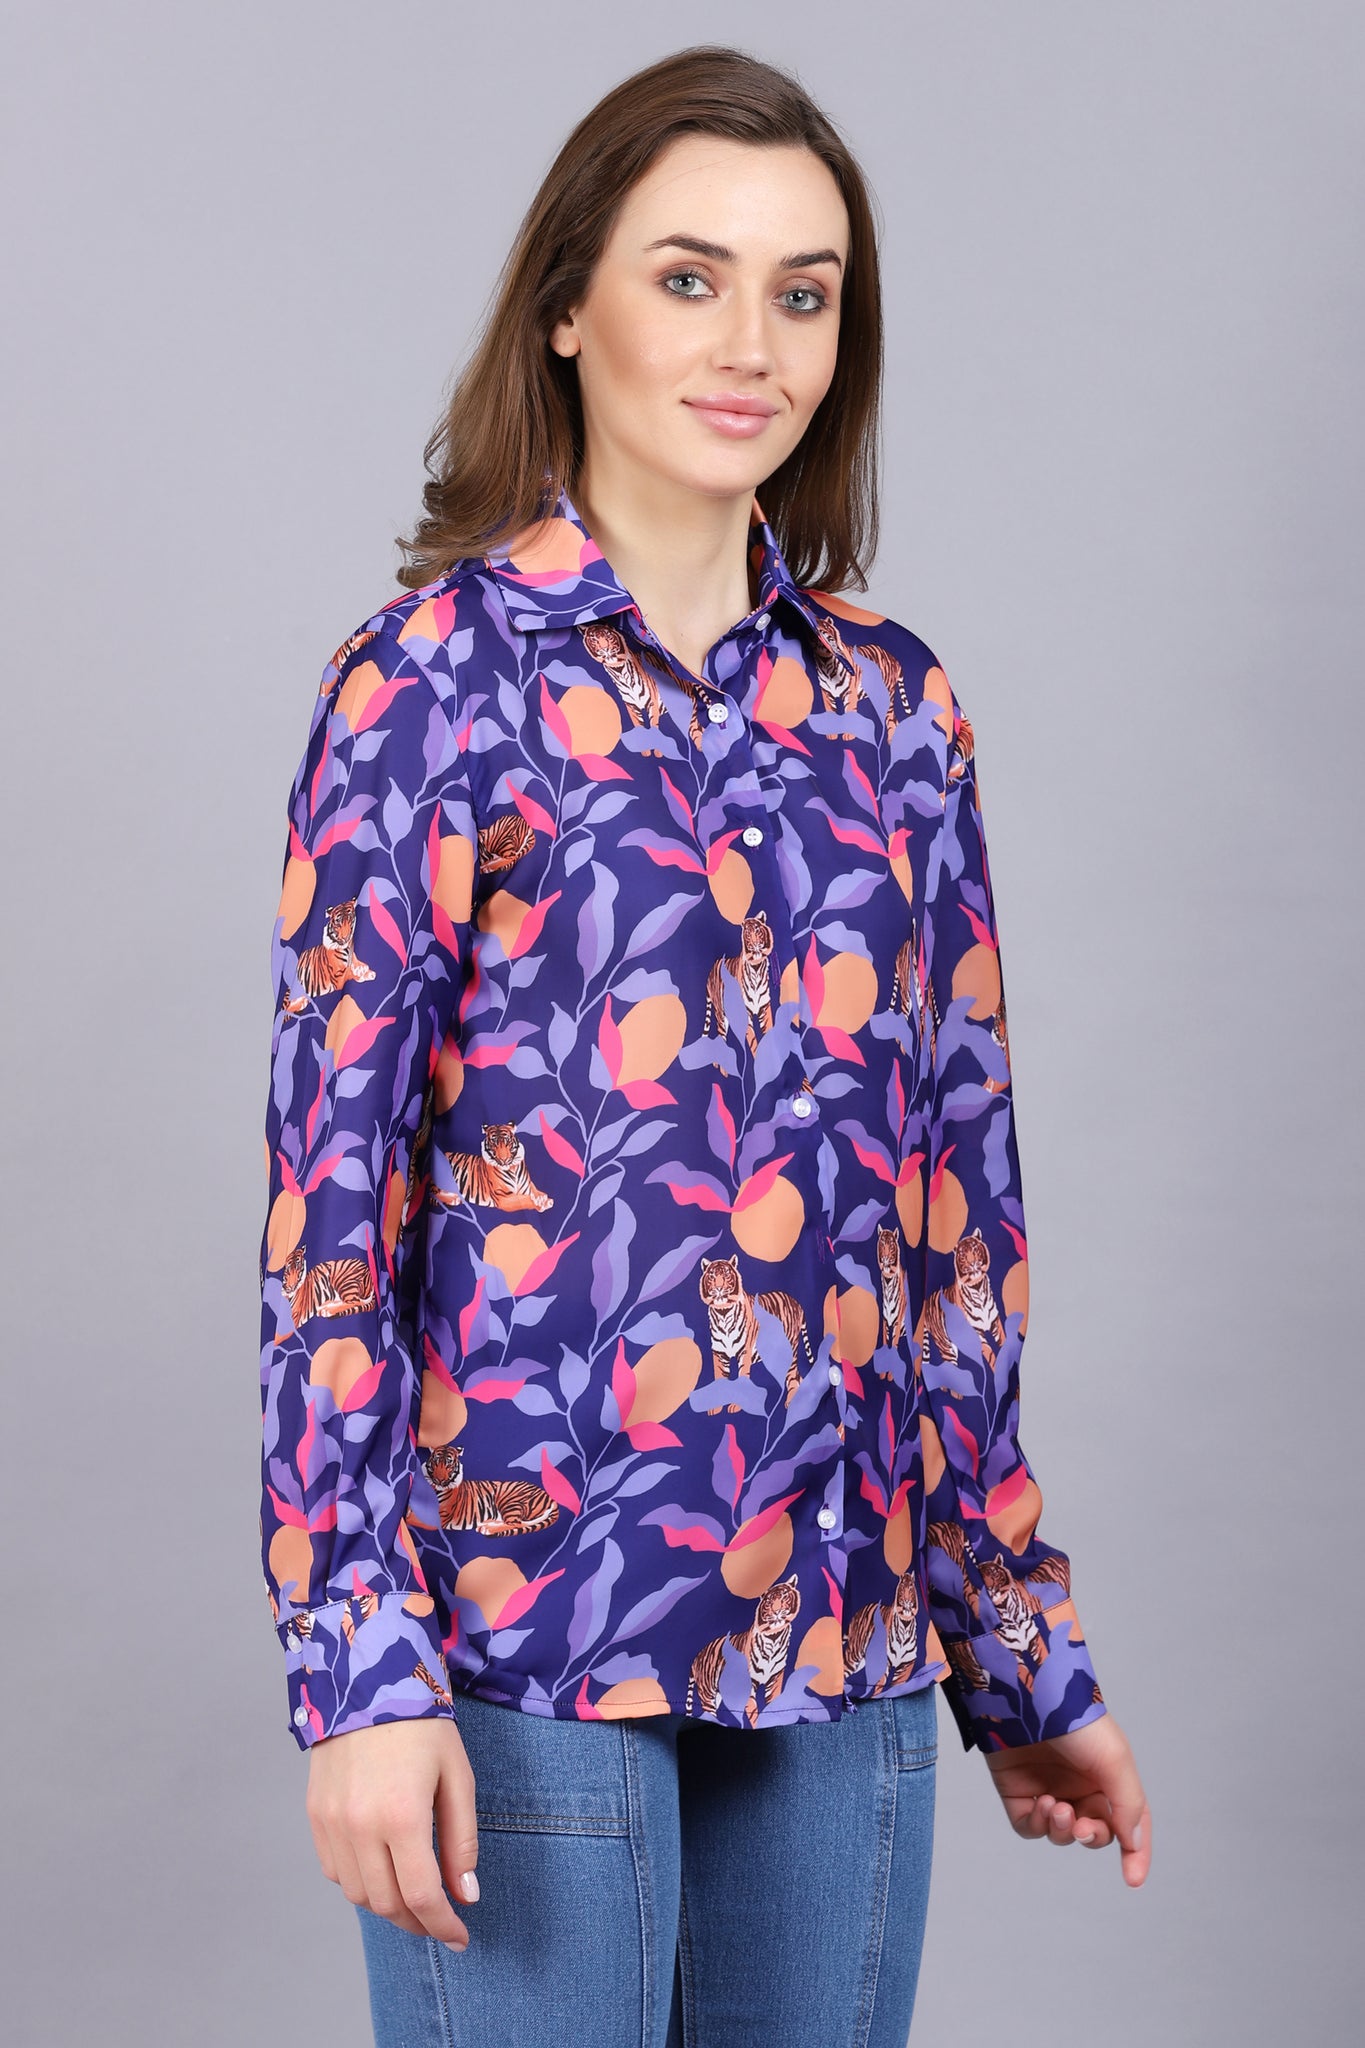 Exclusive Tiger Printed Shirt For Women